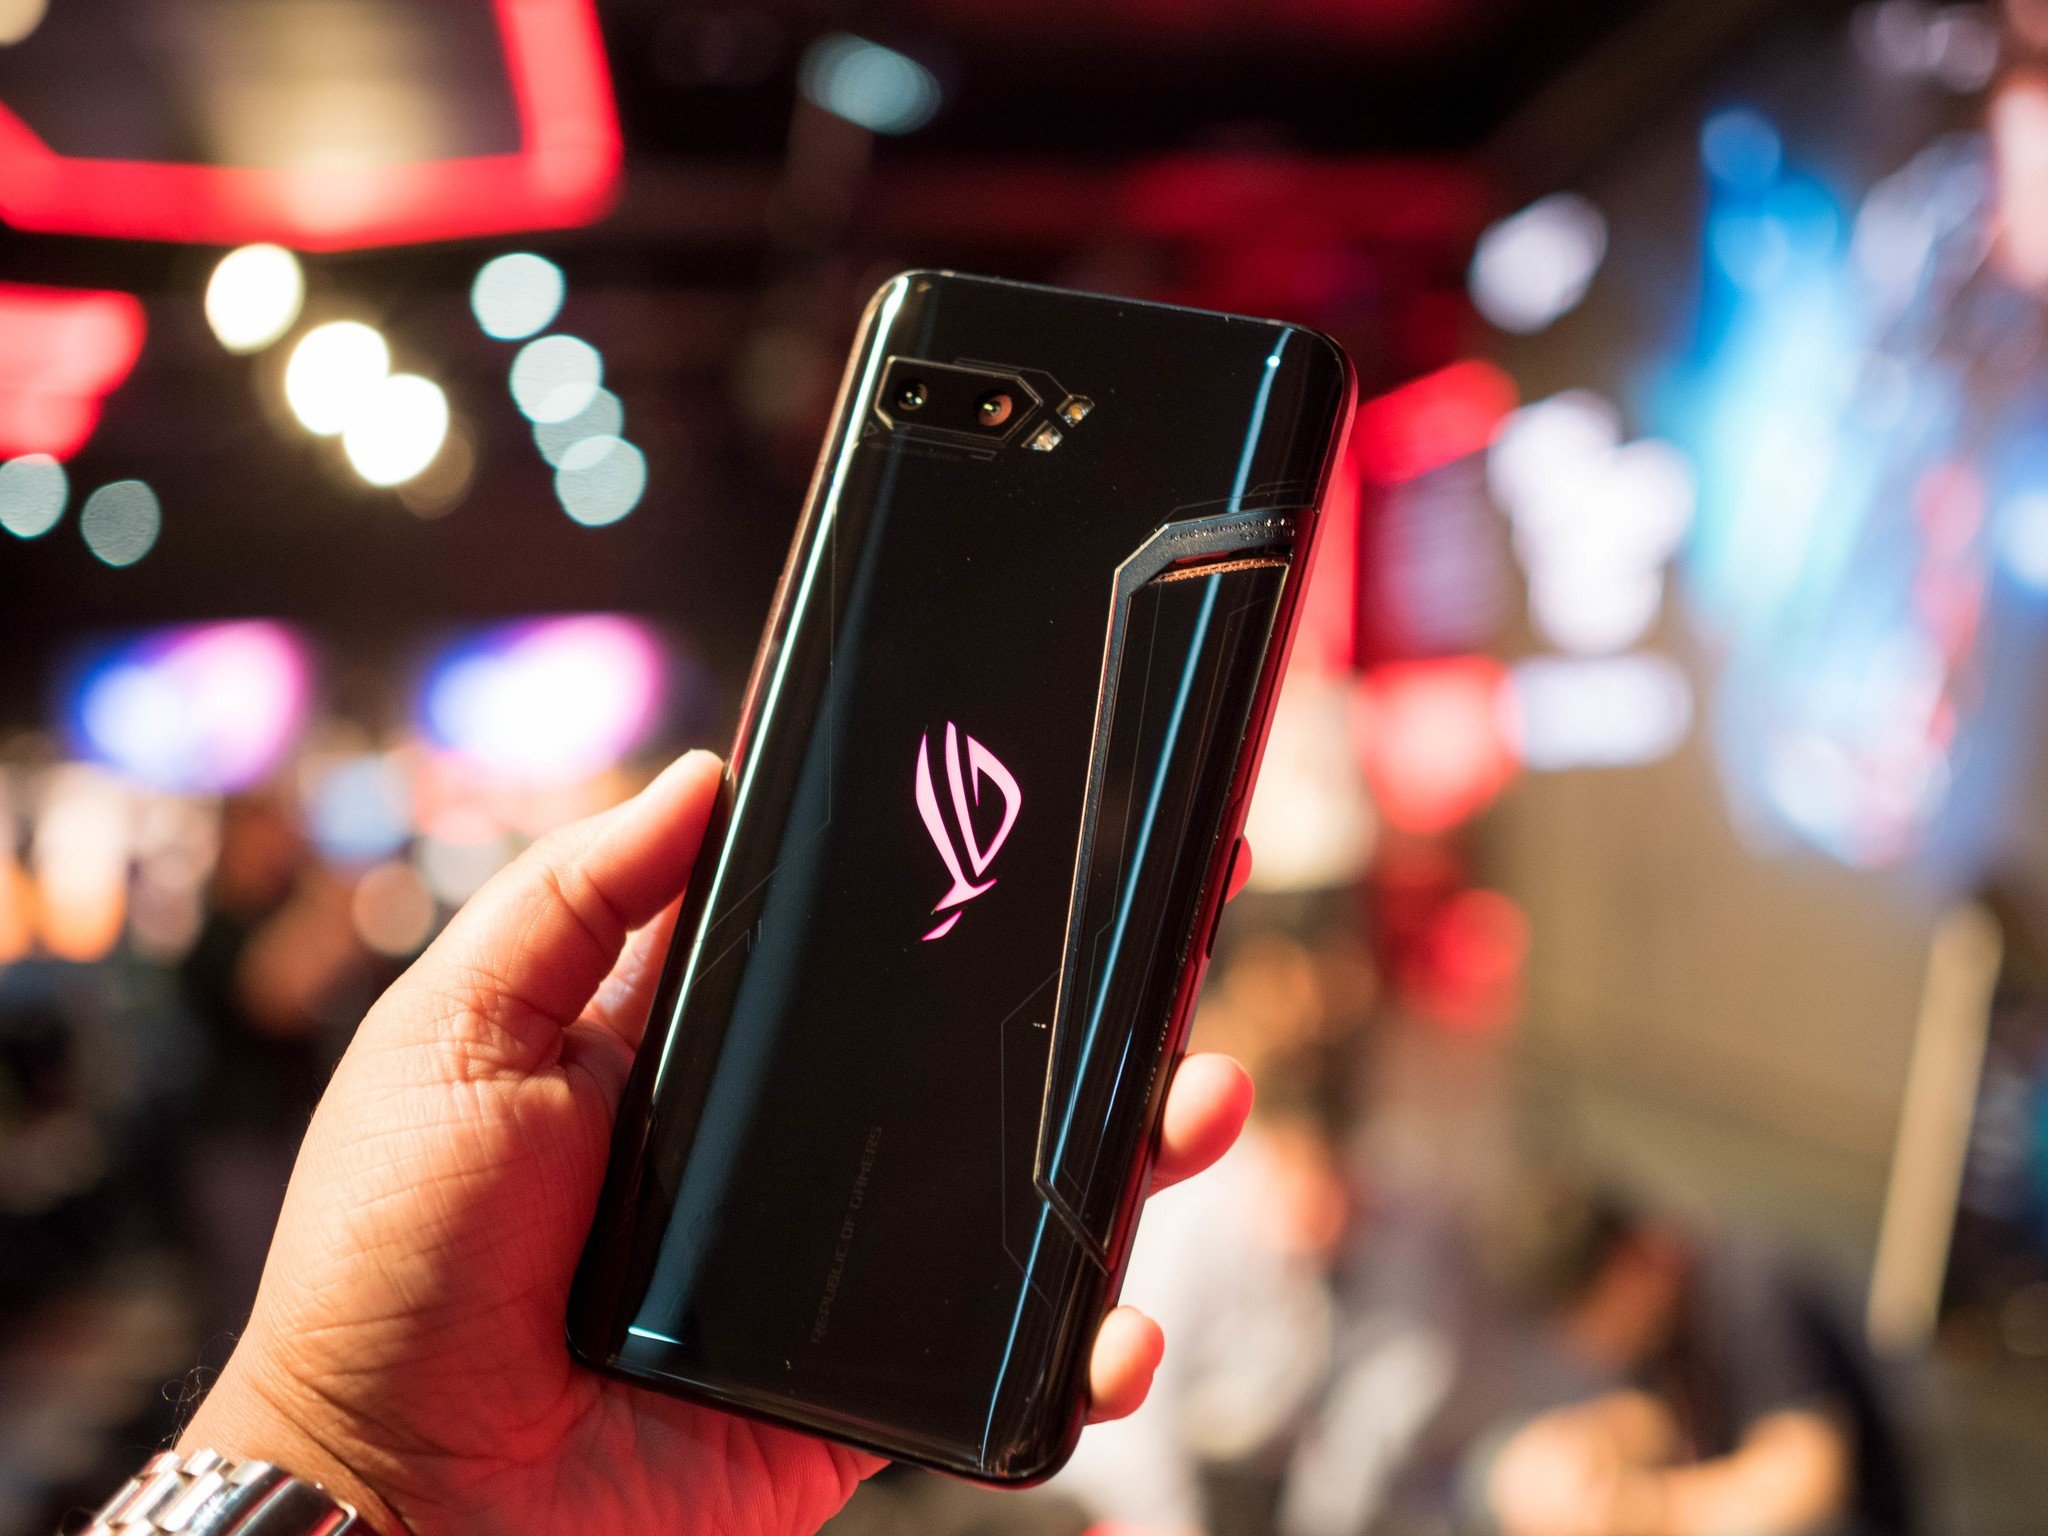 ASUS ROG Phone II now available for purchase in the U.S. for $900 ...